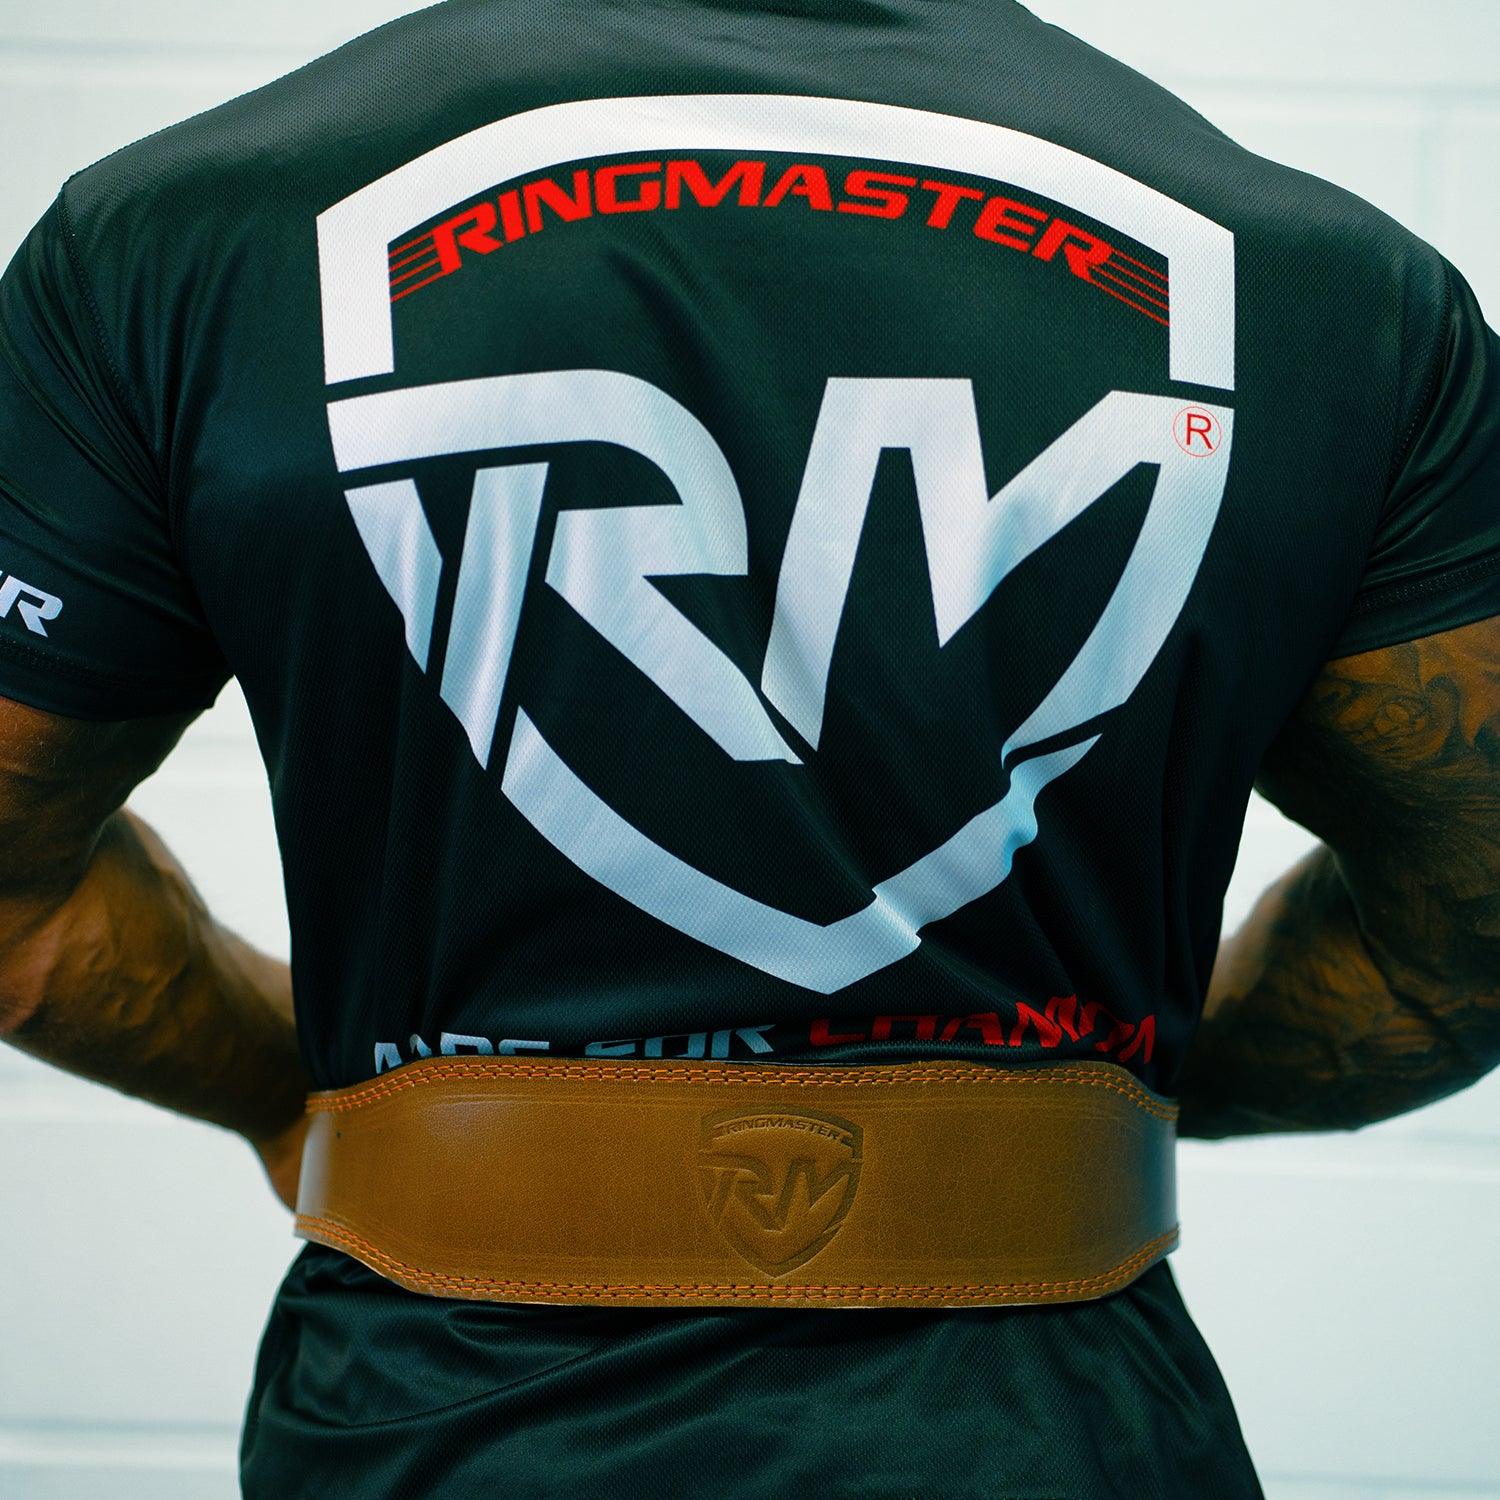 RingMaster Sports Genuine Leather Weight Lifting Gym Belt 4" fitness body building image 6